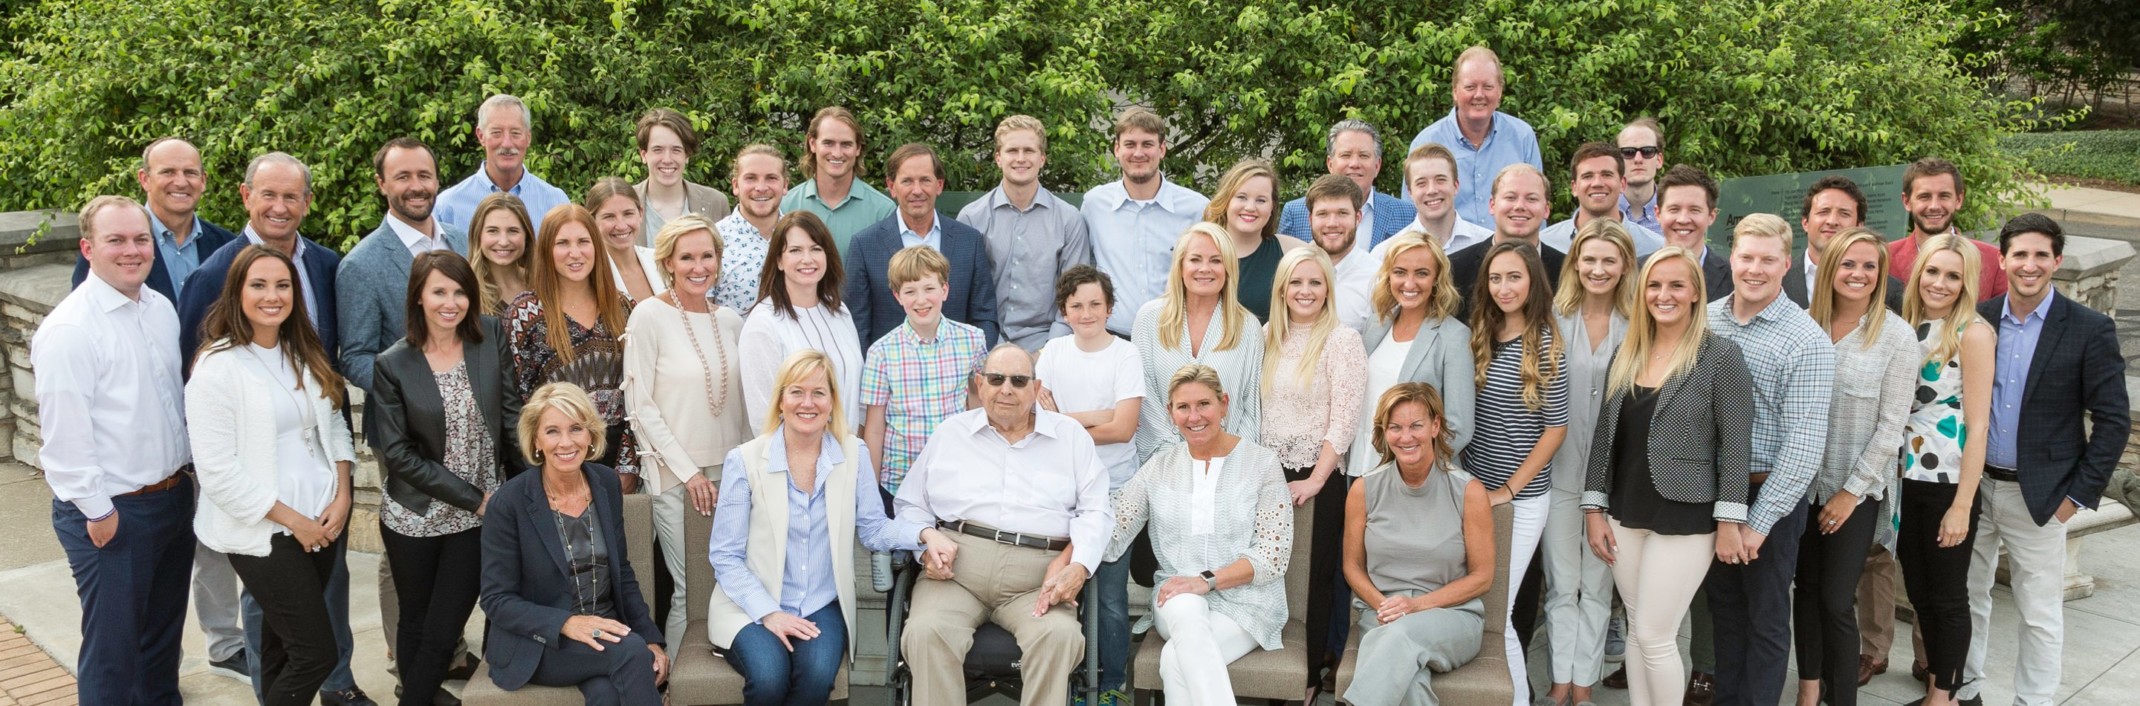 Multiple generations of the Amway's founding families flank Rich DeVos.